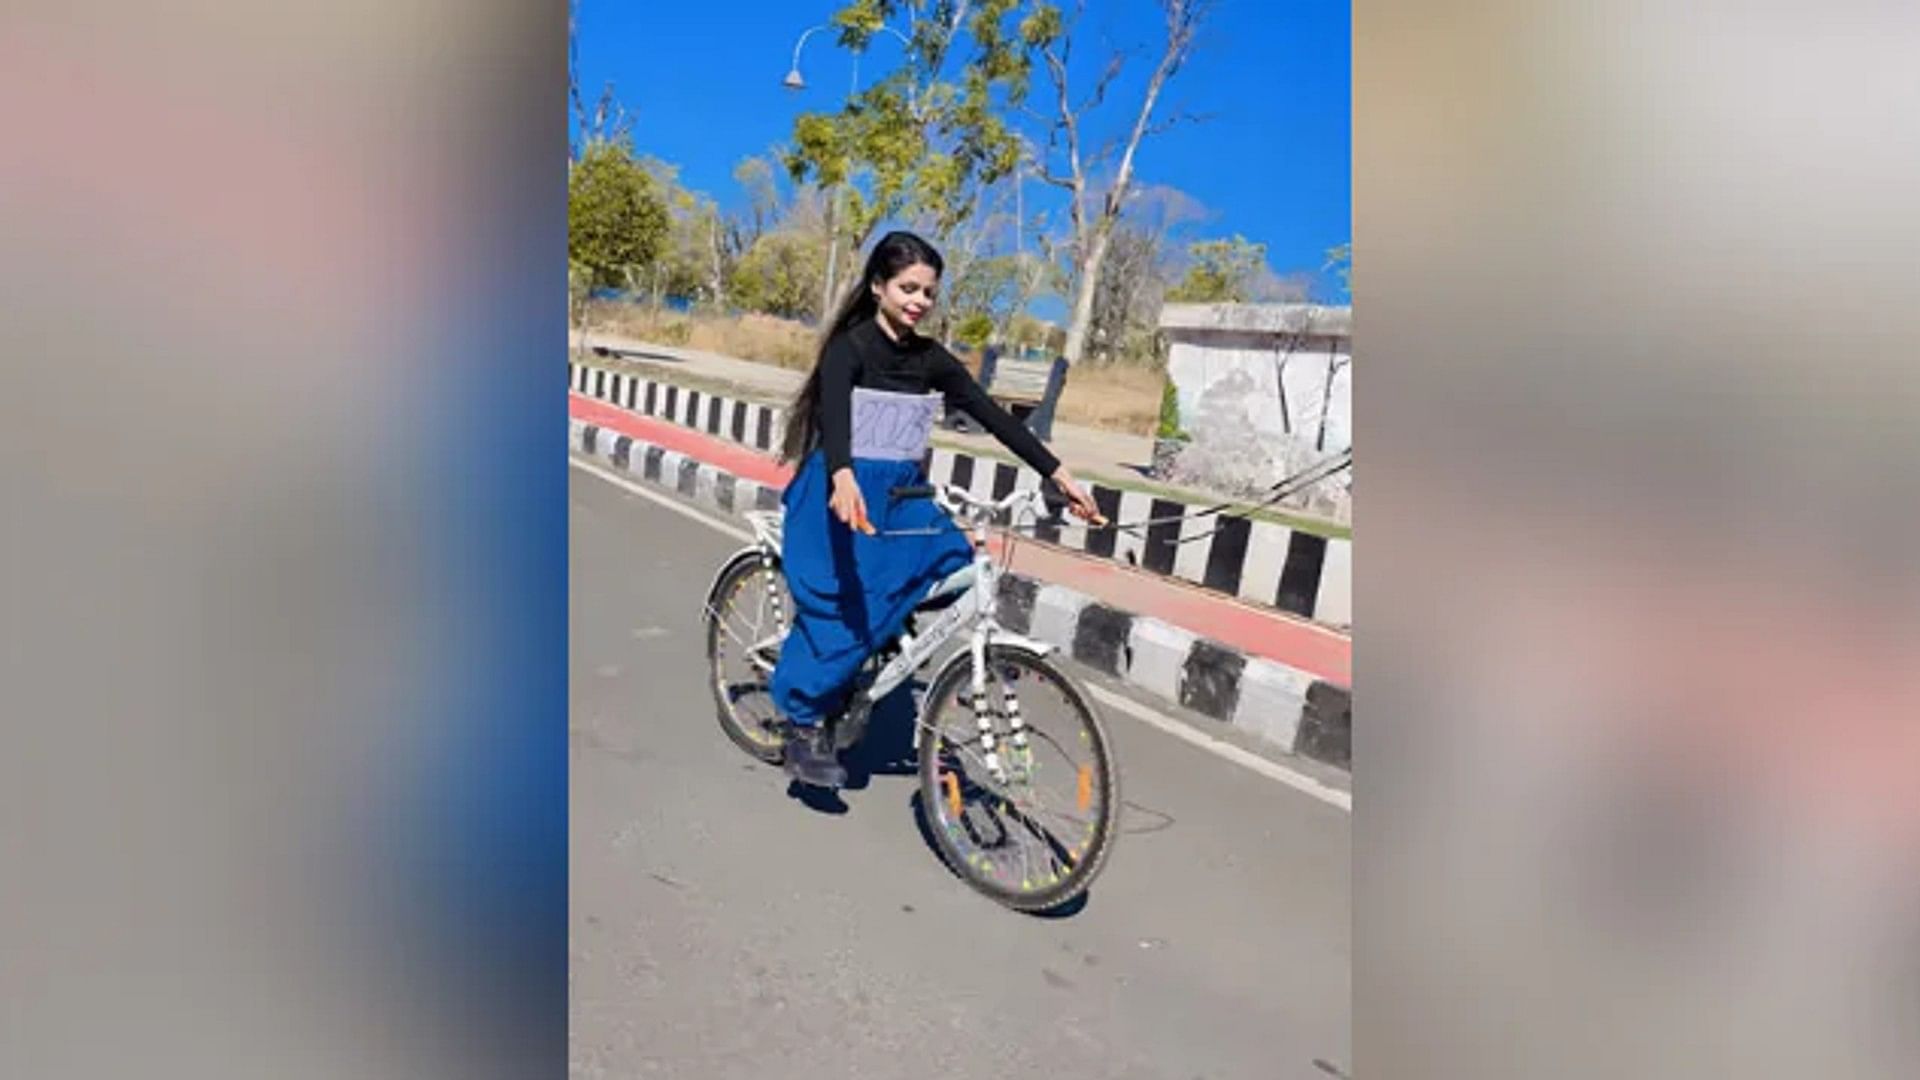 Girl jumping rope while riding a bicycle without holding the handlebar video viral on social media